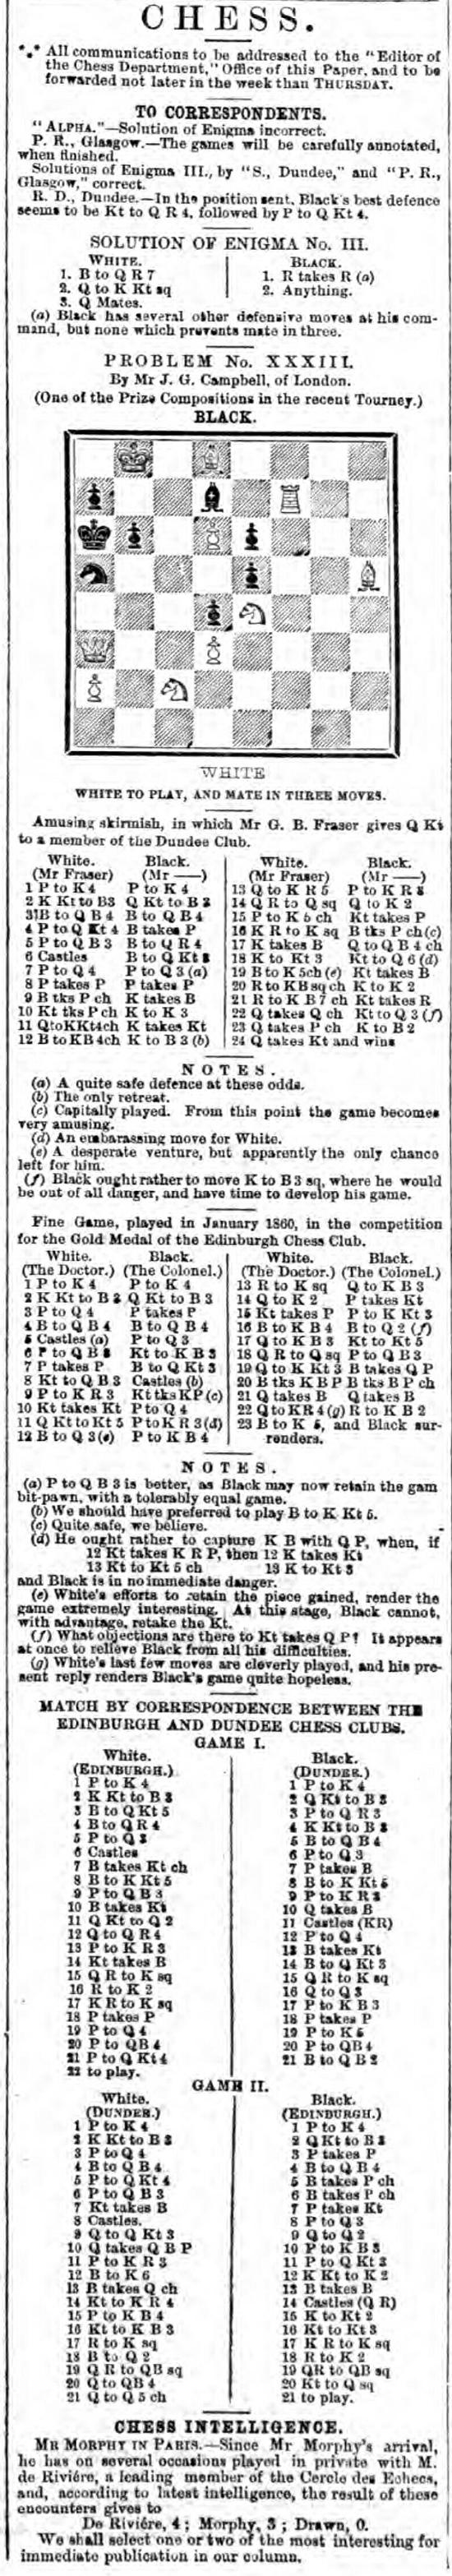 1863.03.16-01 Dundee Courier and Argus.jpg